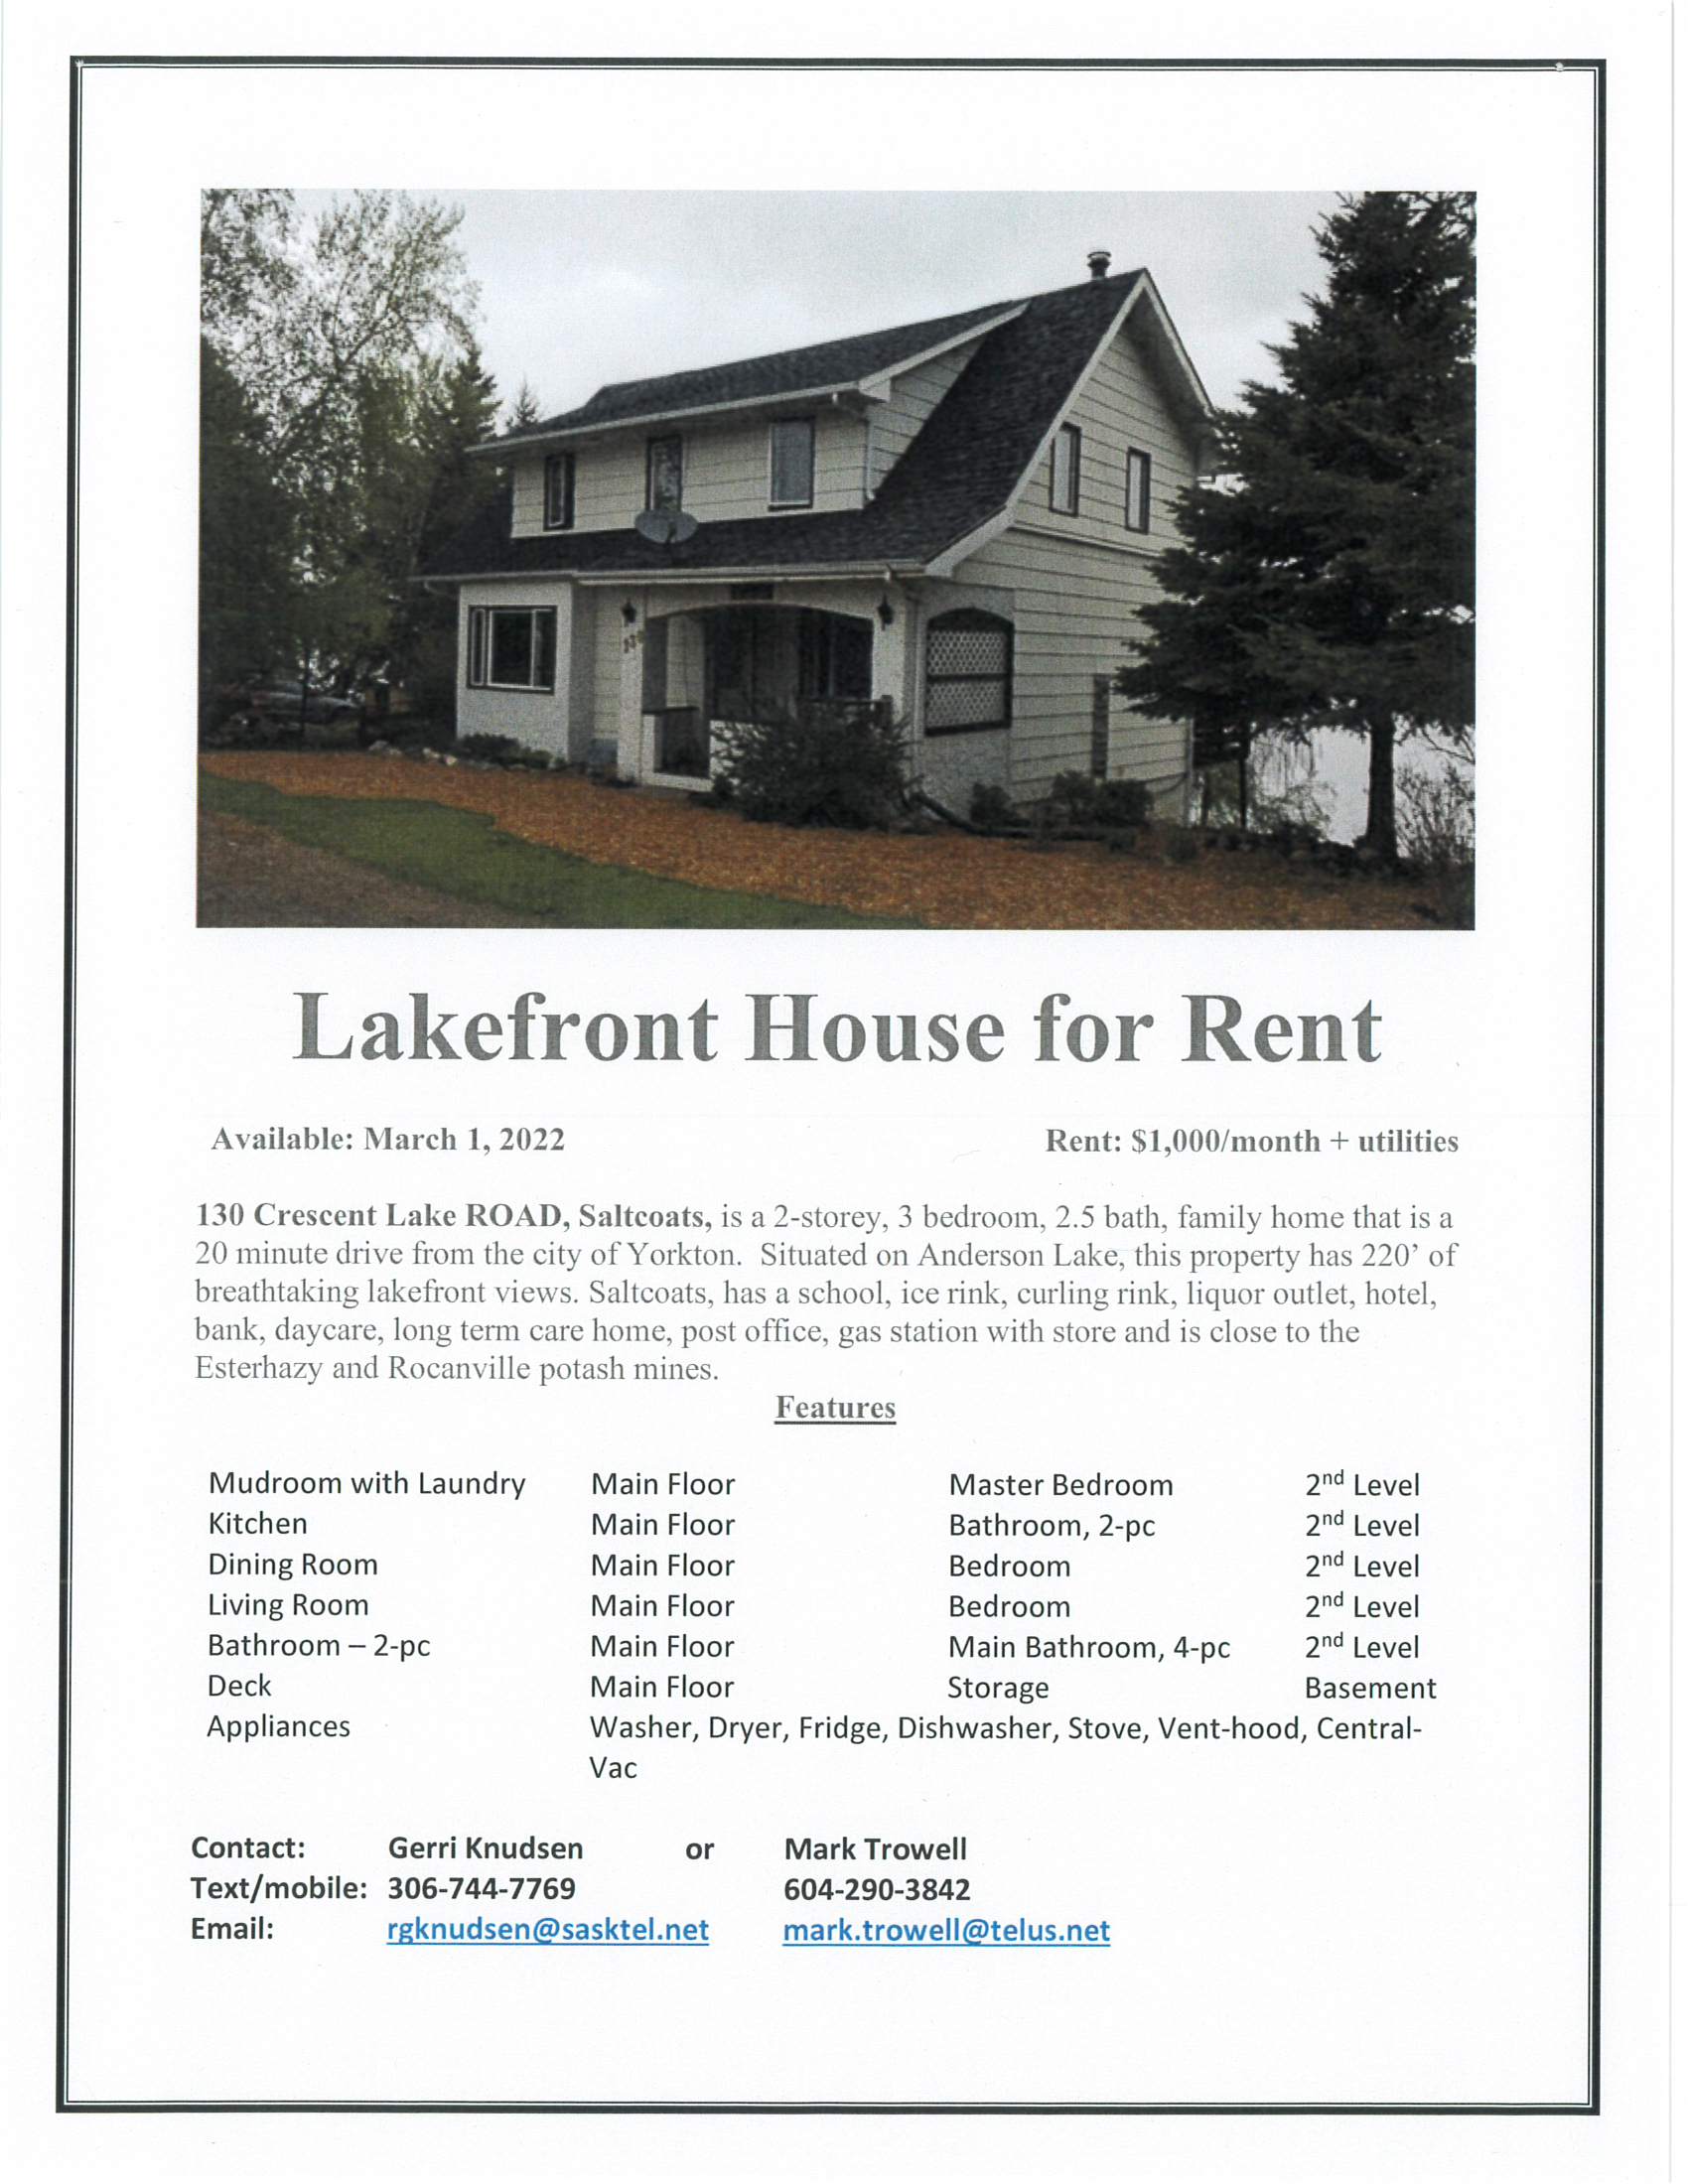 130 Crescent Lake Road for Rent